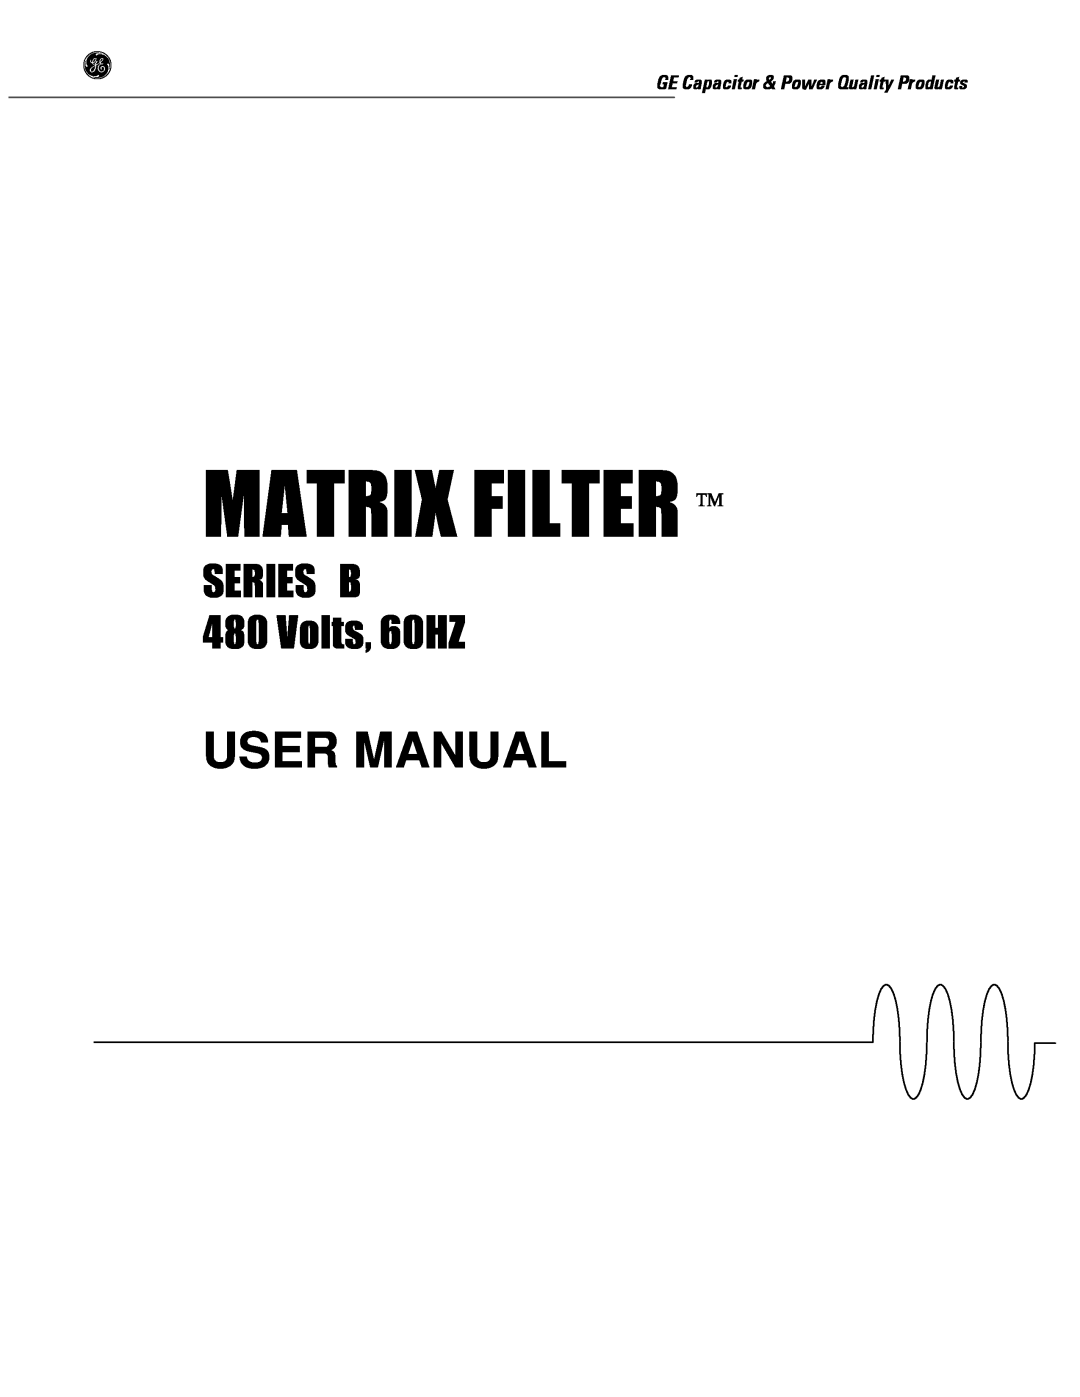 GE user manual Matrix Filter , SERIES B 480 Volts, 60HZ, GE Capacitor & Power Quality Products 